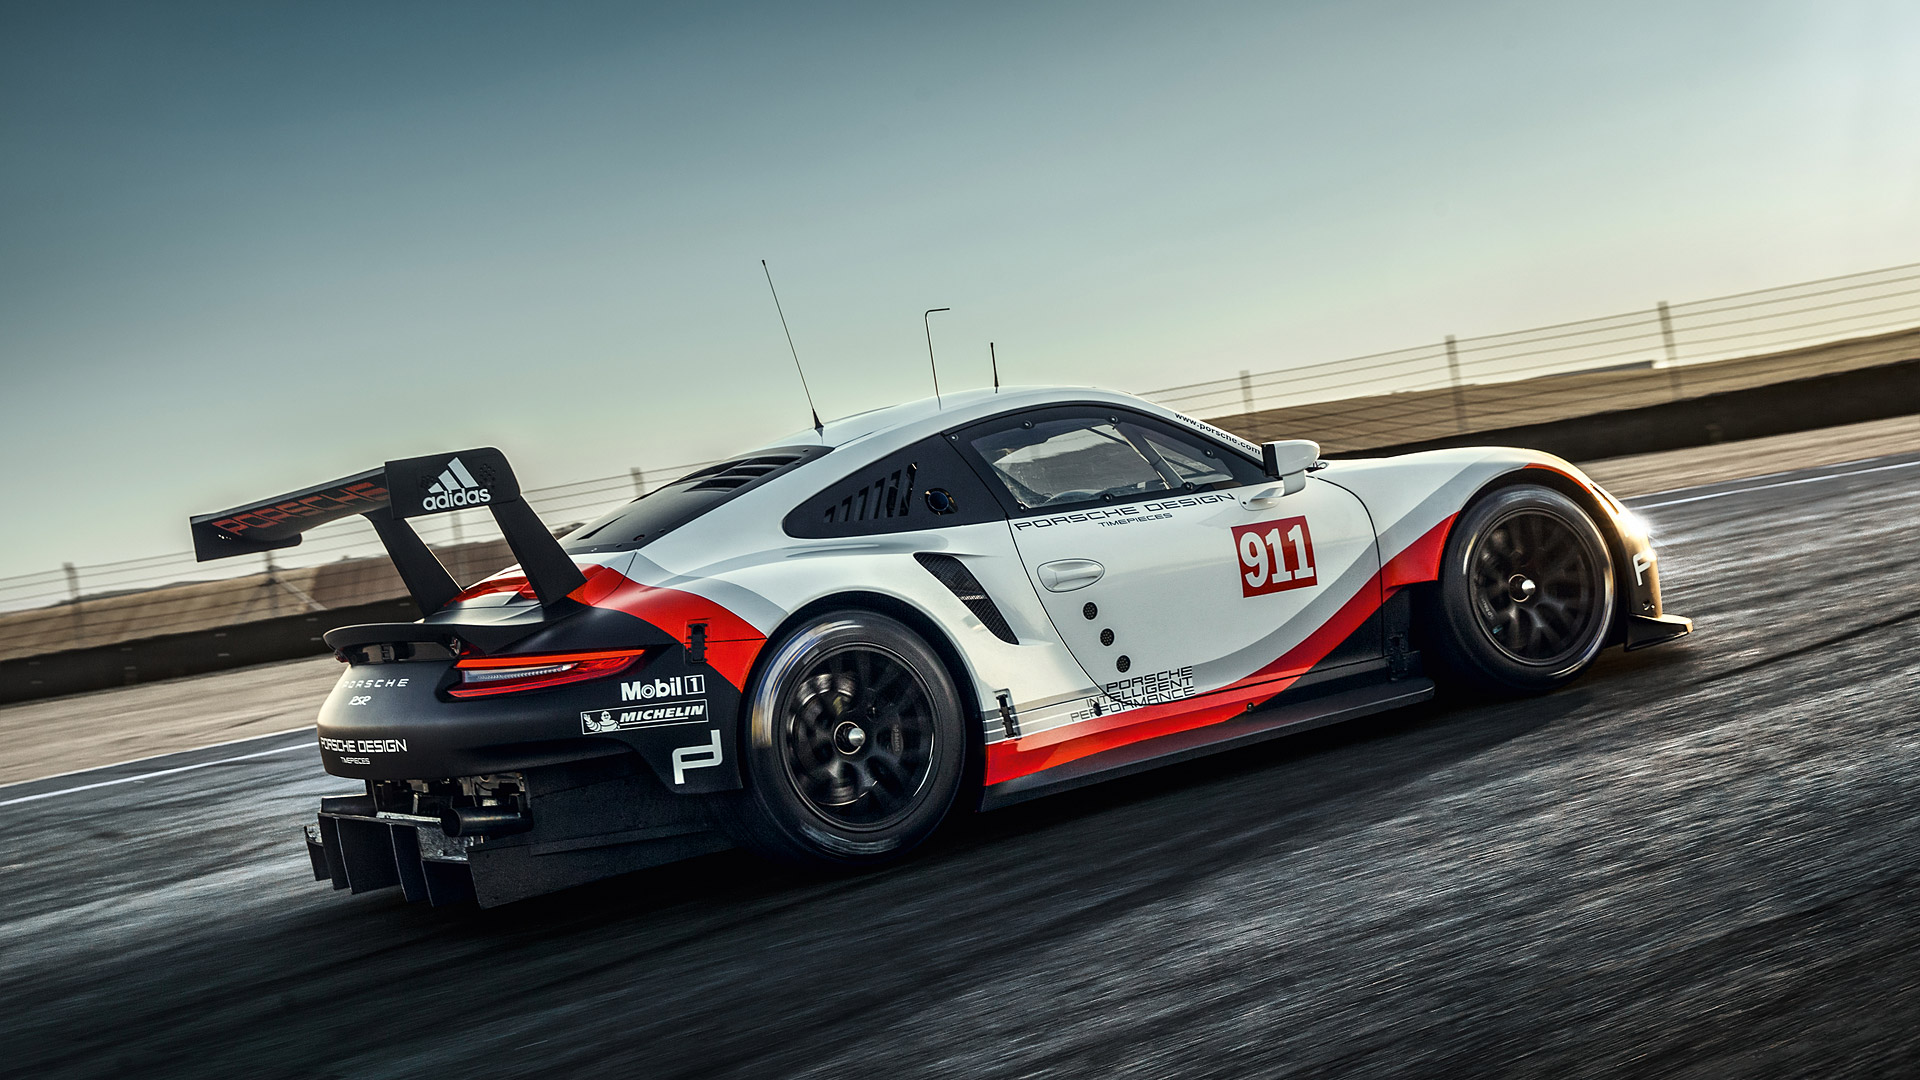 Porsche 911 RSR Wallpapers and Background Images   stmednet